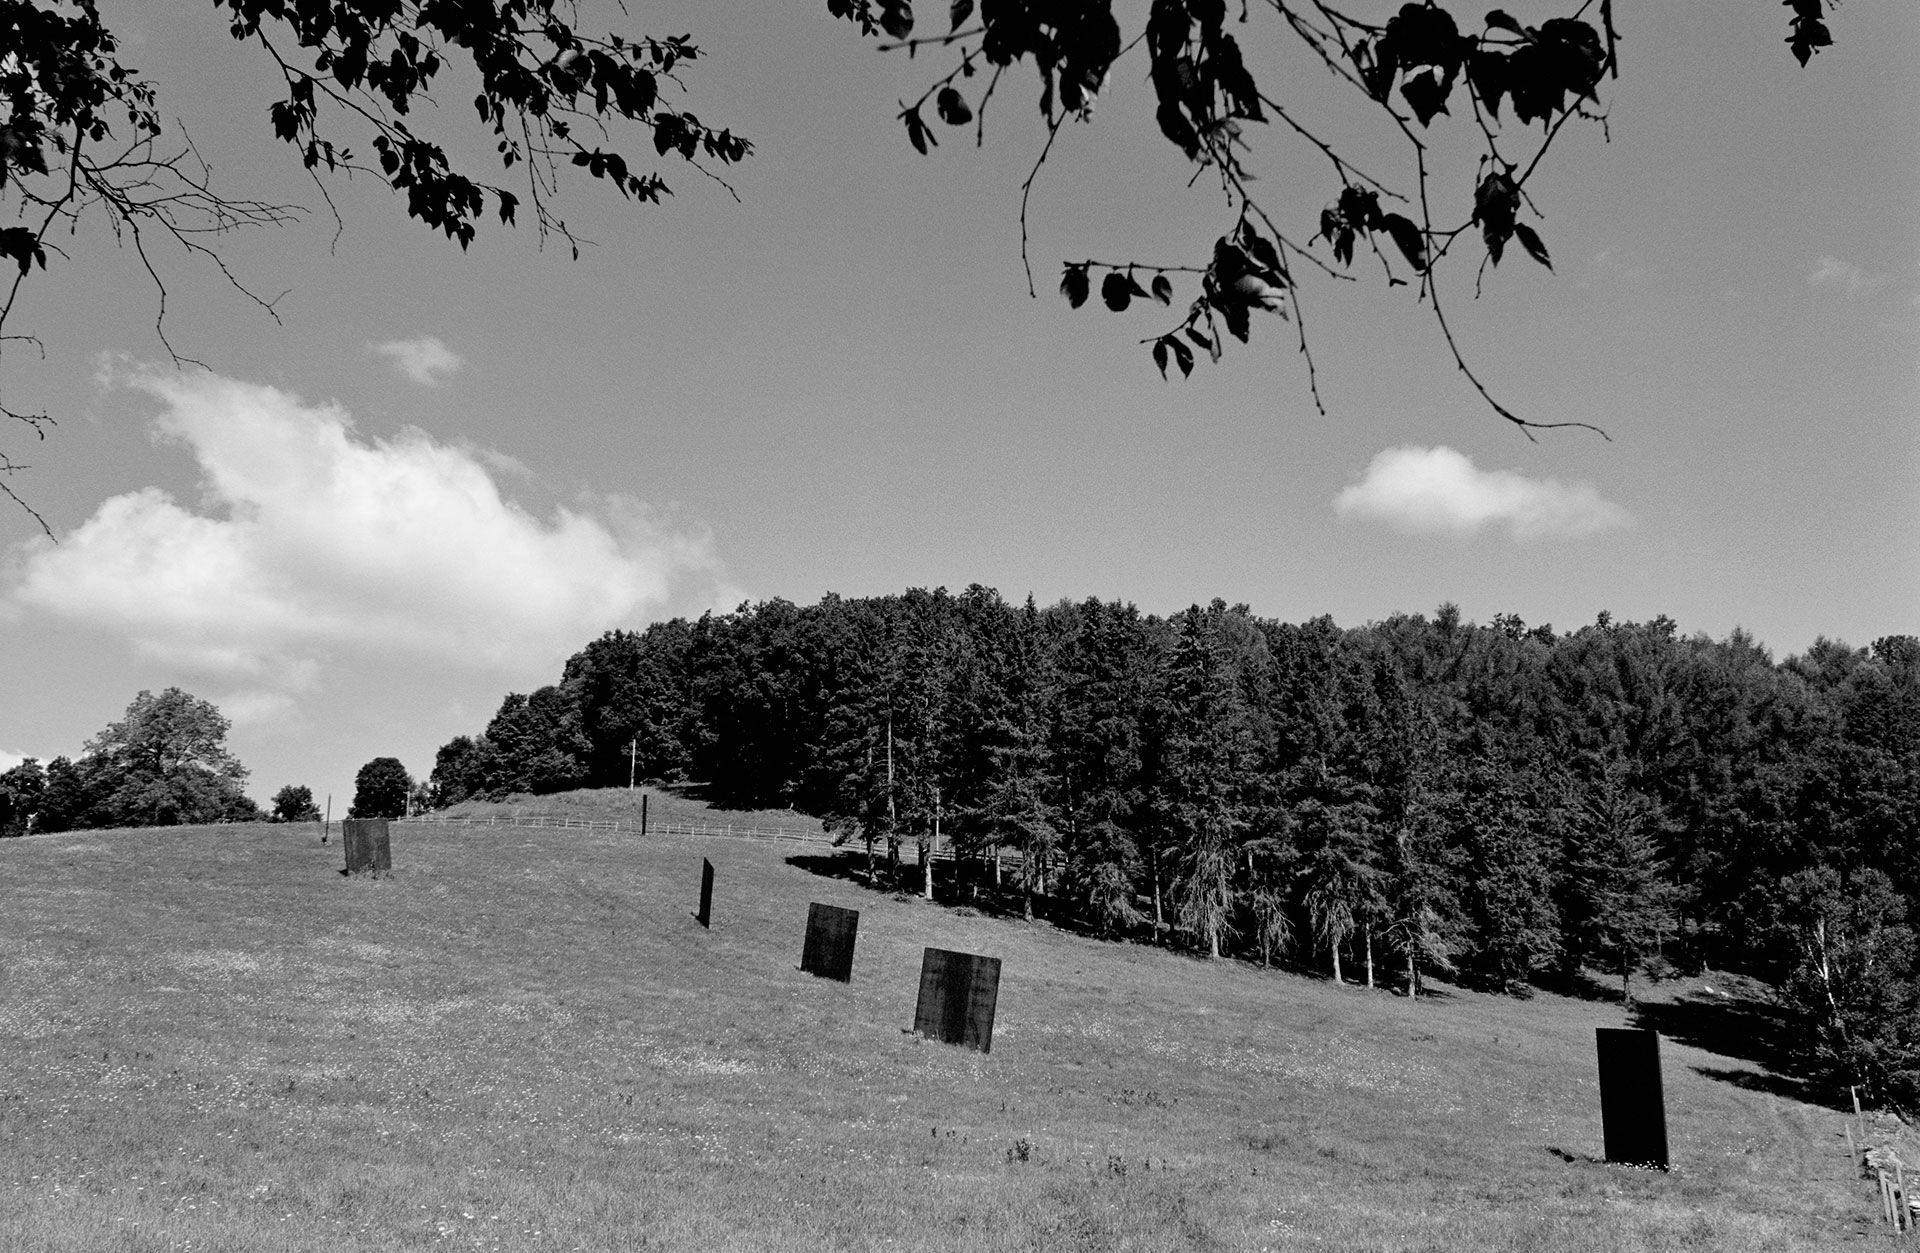 Installation view of Iron Mountain Run by Richard Serra, comprised of seven steel sculptures, dated 2002.